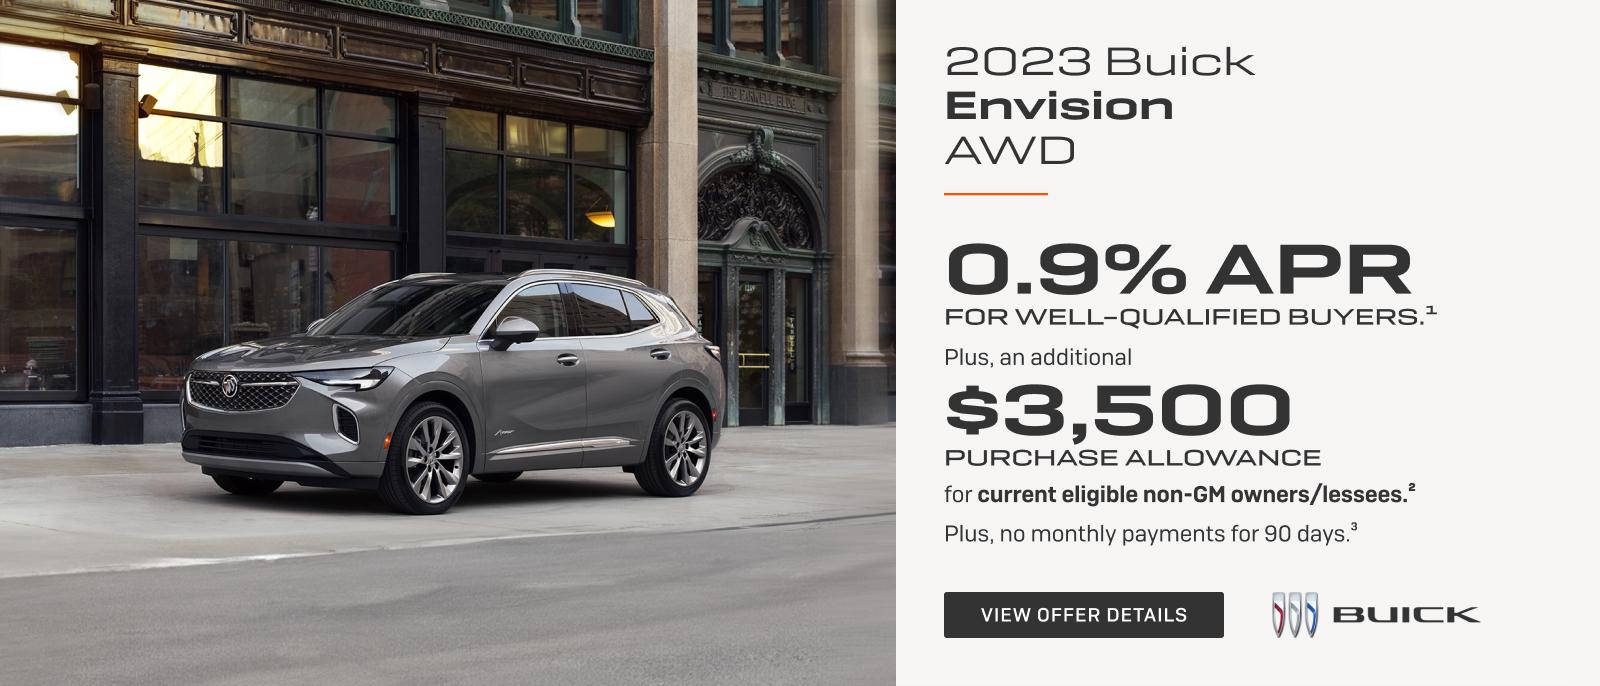 0.9% APR 
FOR WELL-QUALIFIED BUYERS.1

Plus, an additional $3,500 PURCHASE ALLOWANCE for current eligible non-GM owners/lessees.2

Plus, no monthly payments for 90 days.3